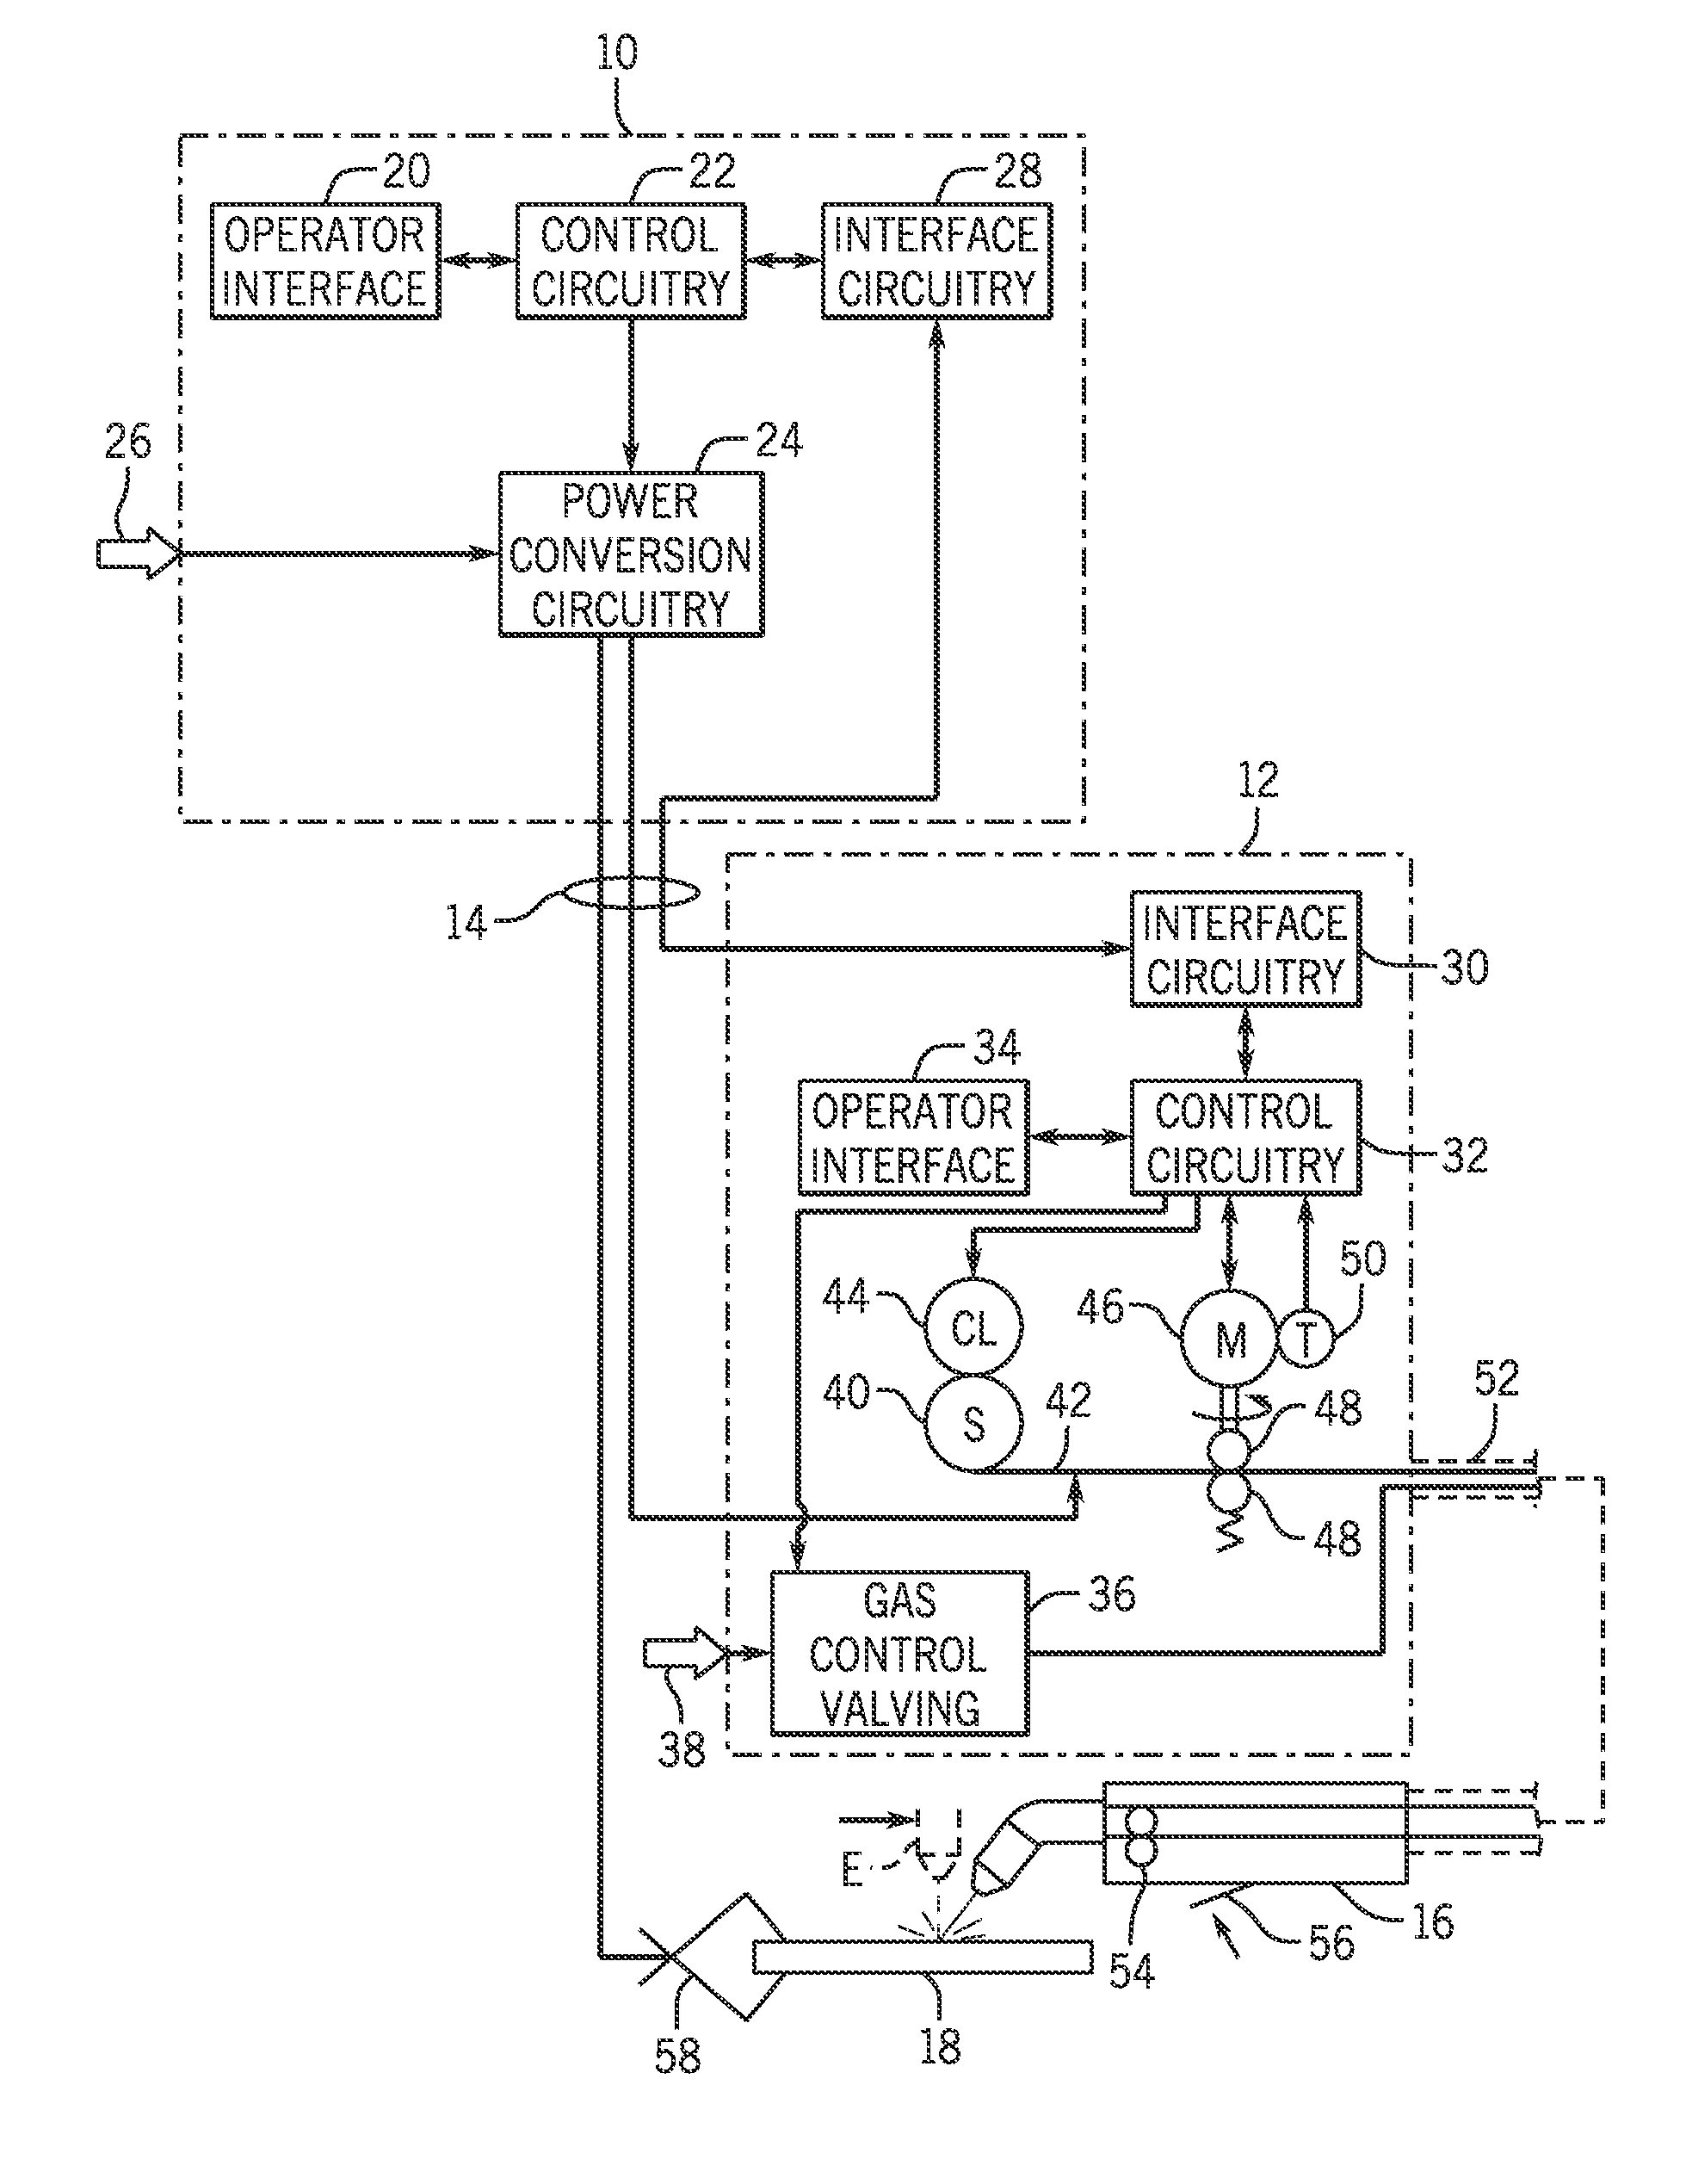 Hotwire deposition material processing system and method